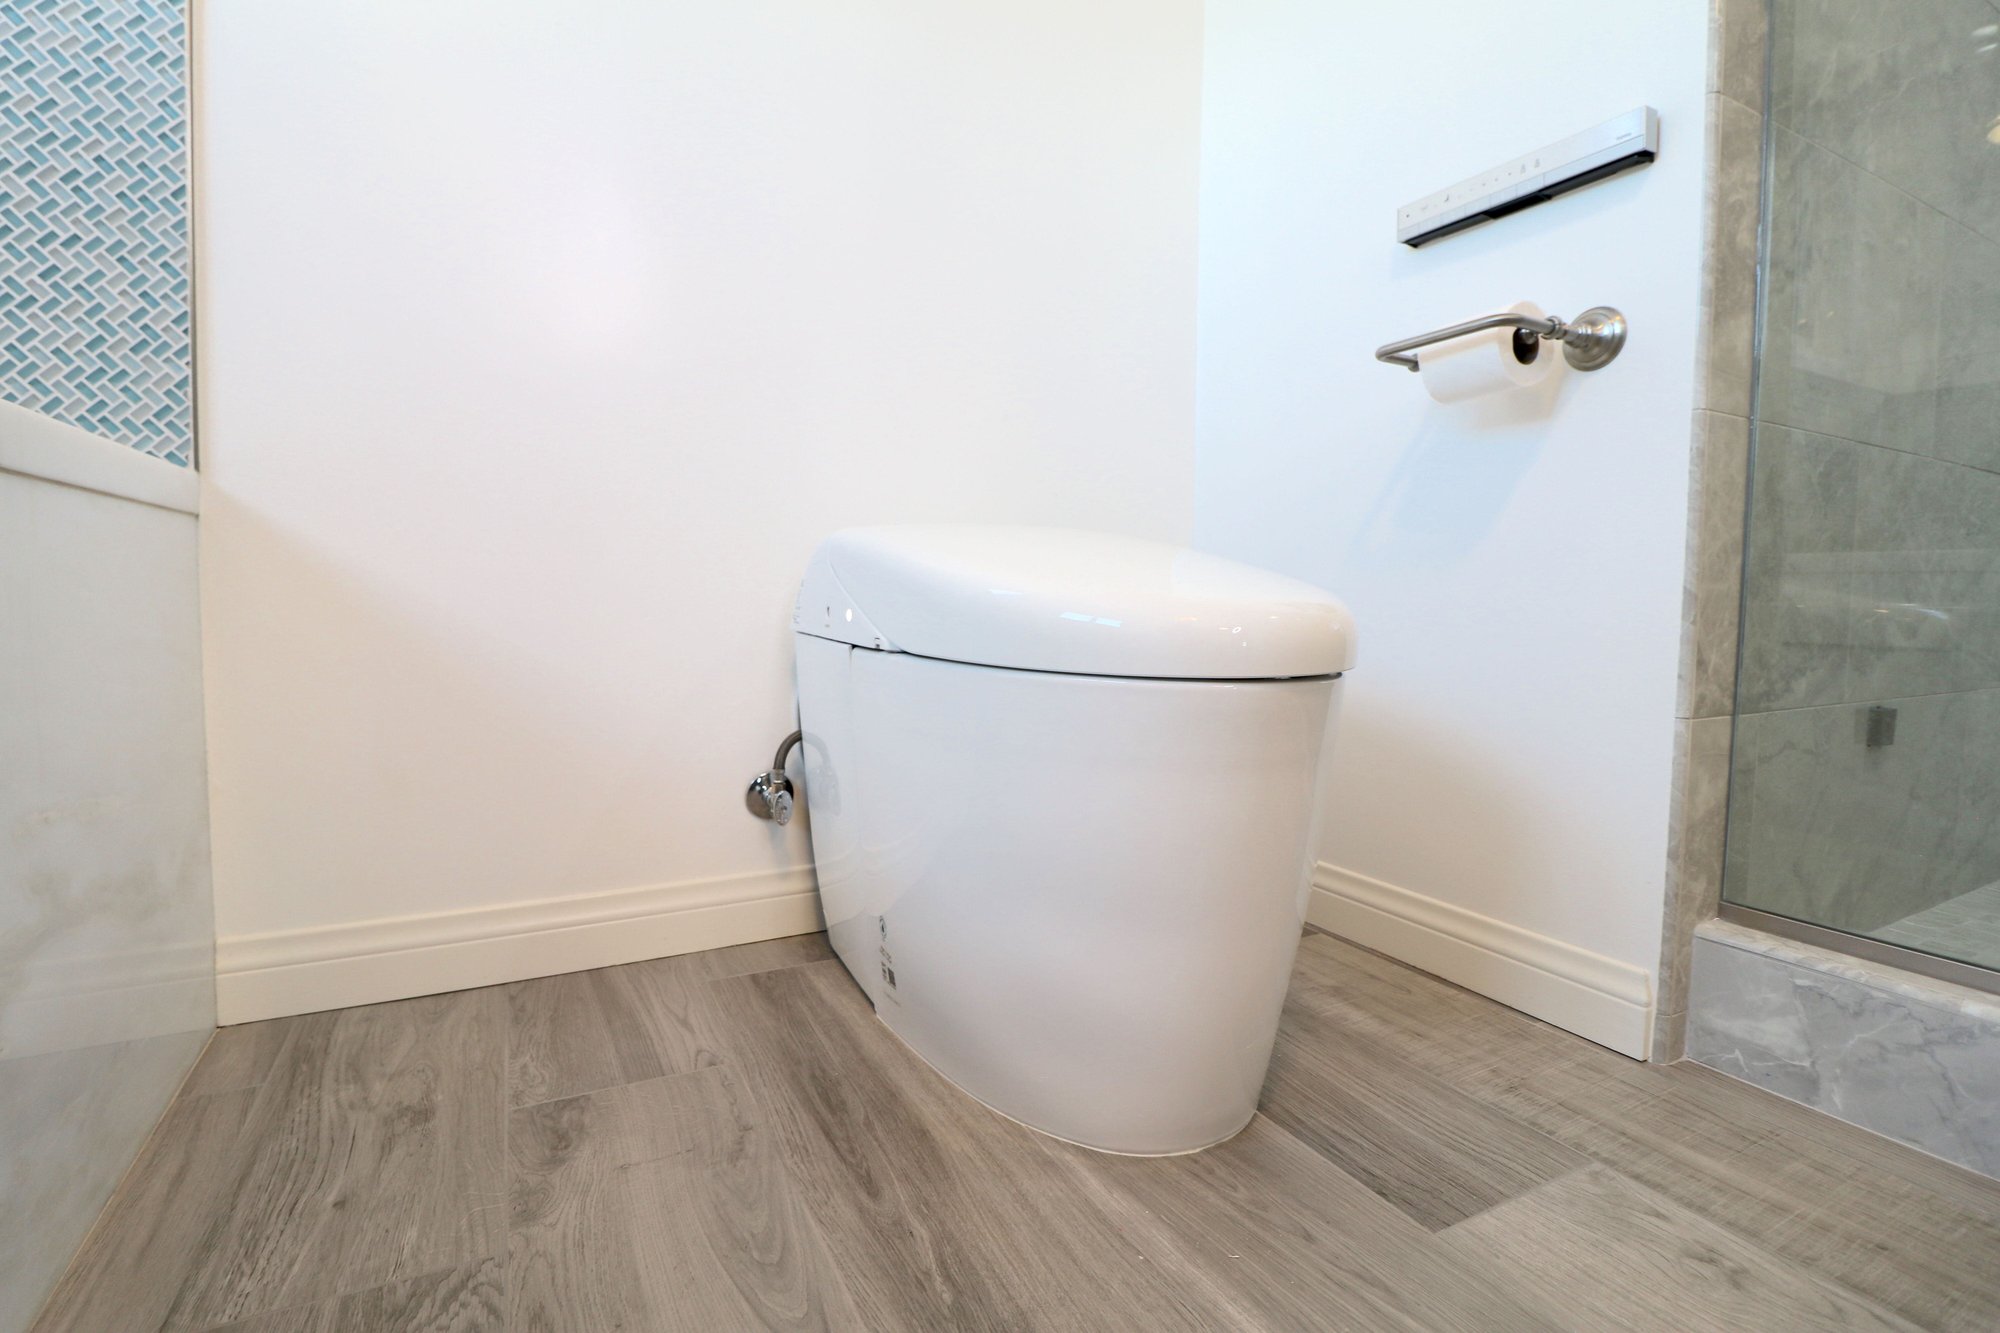 Toto neorest - bidet - Master bathroom remodel - best south bay - bay cities construction